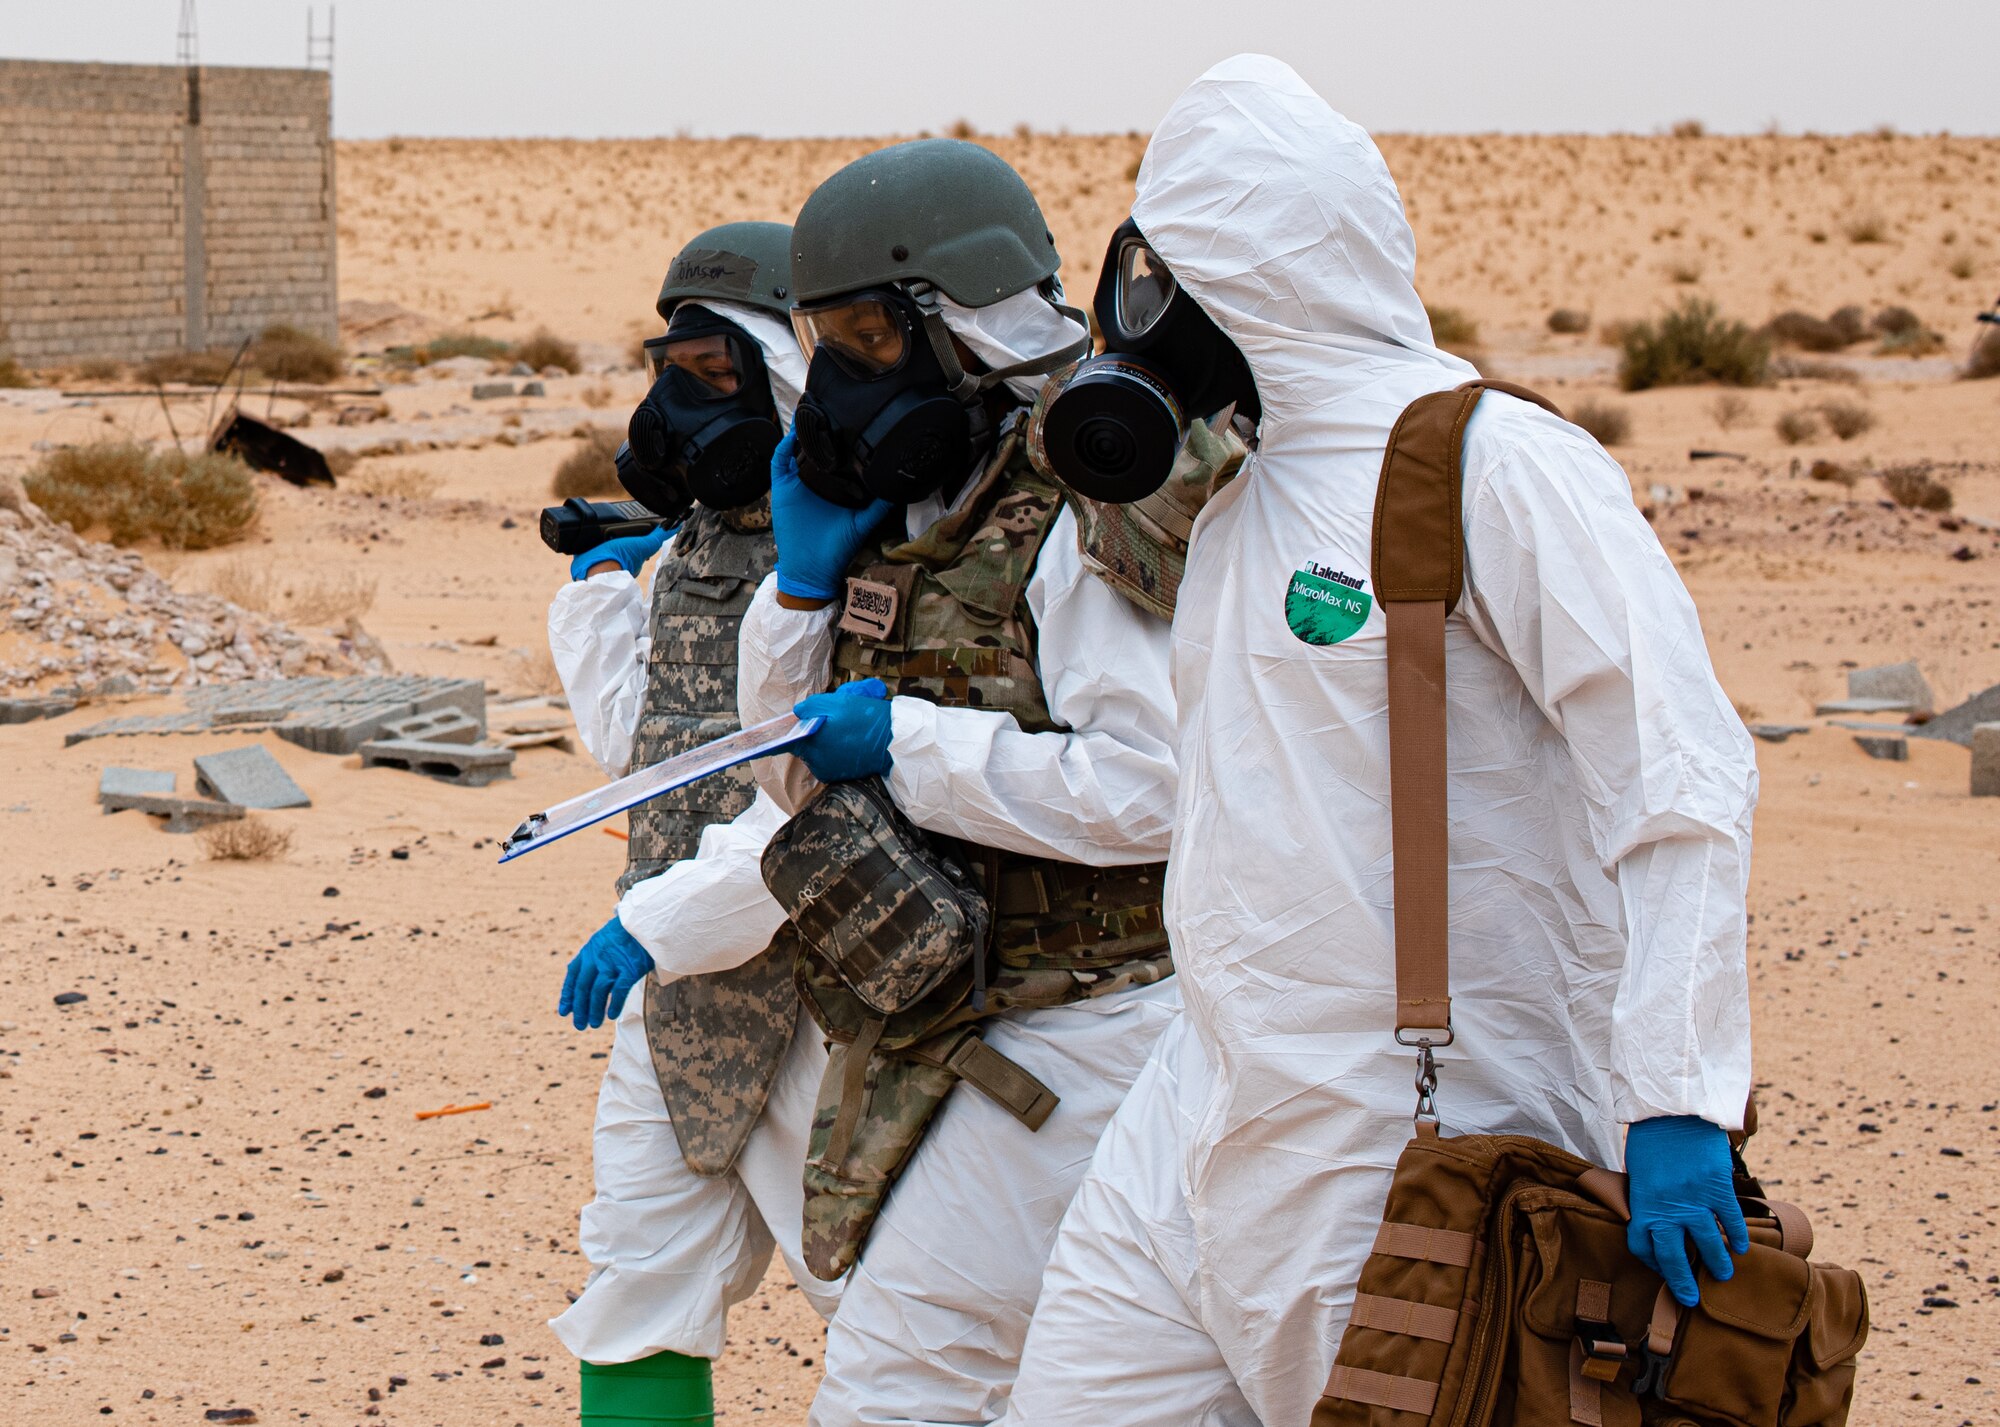 Airmen from the 378th Expeditionary Civil Engineer Squadron emergency management flight recently participated in a hazardous materials exercise at Prince Sultan Air Base, Kingdom of Saudi Arabia.